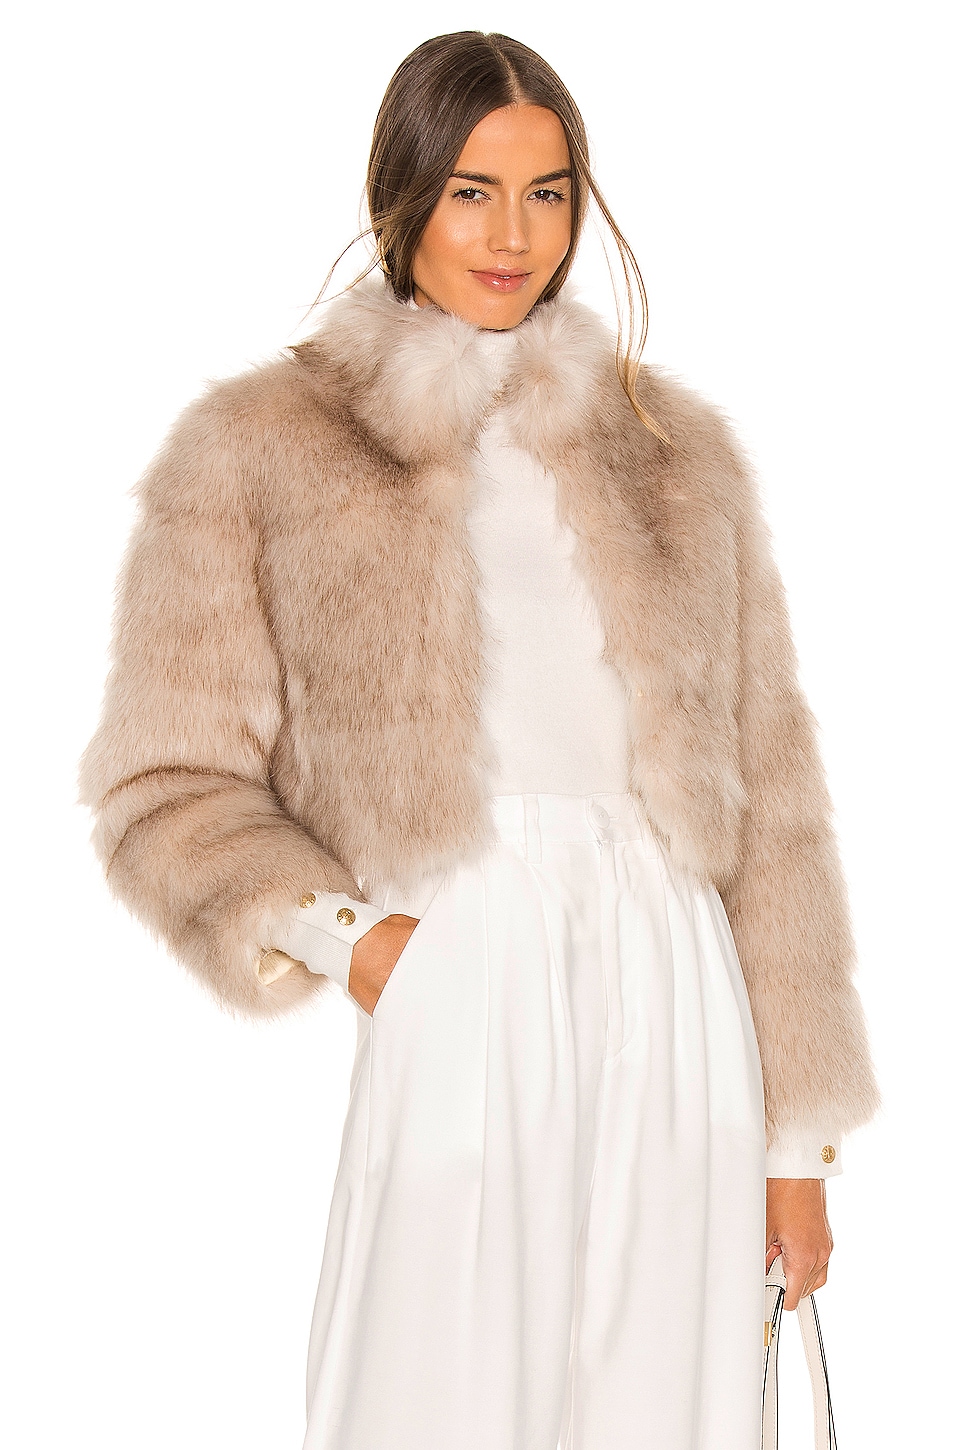 15 Faux Fur Jacket Outfits Will Never, Most Realistic Faux Fur Coats 2021